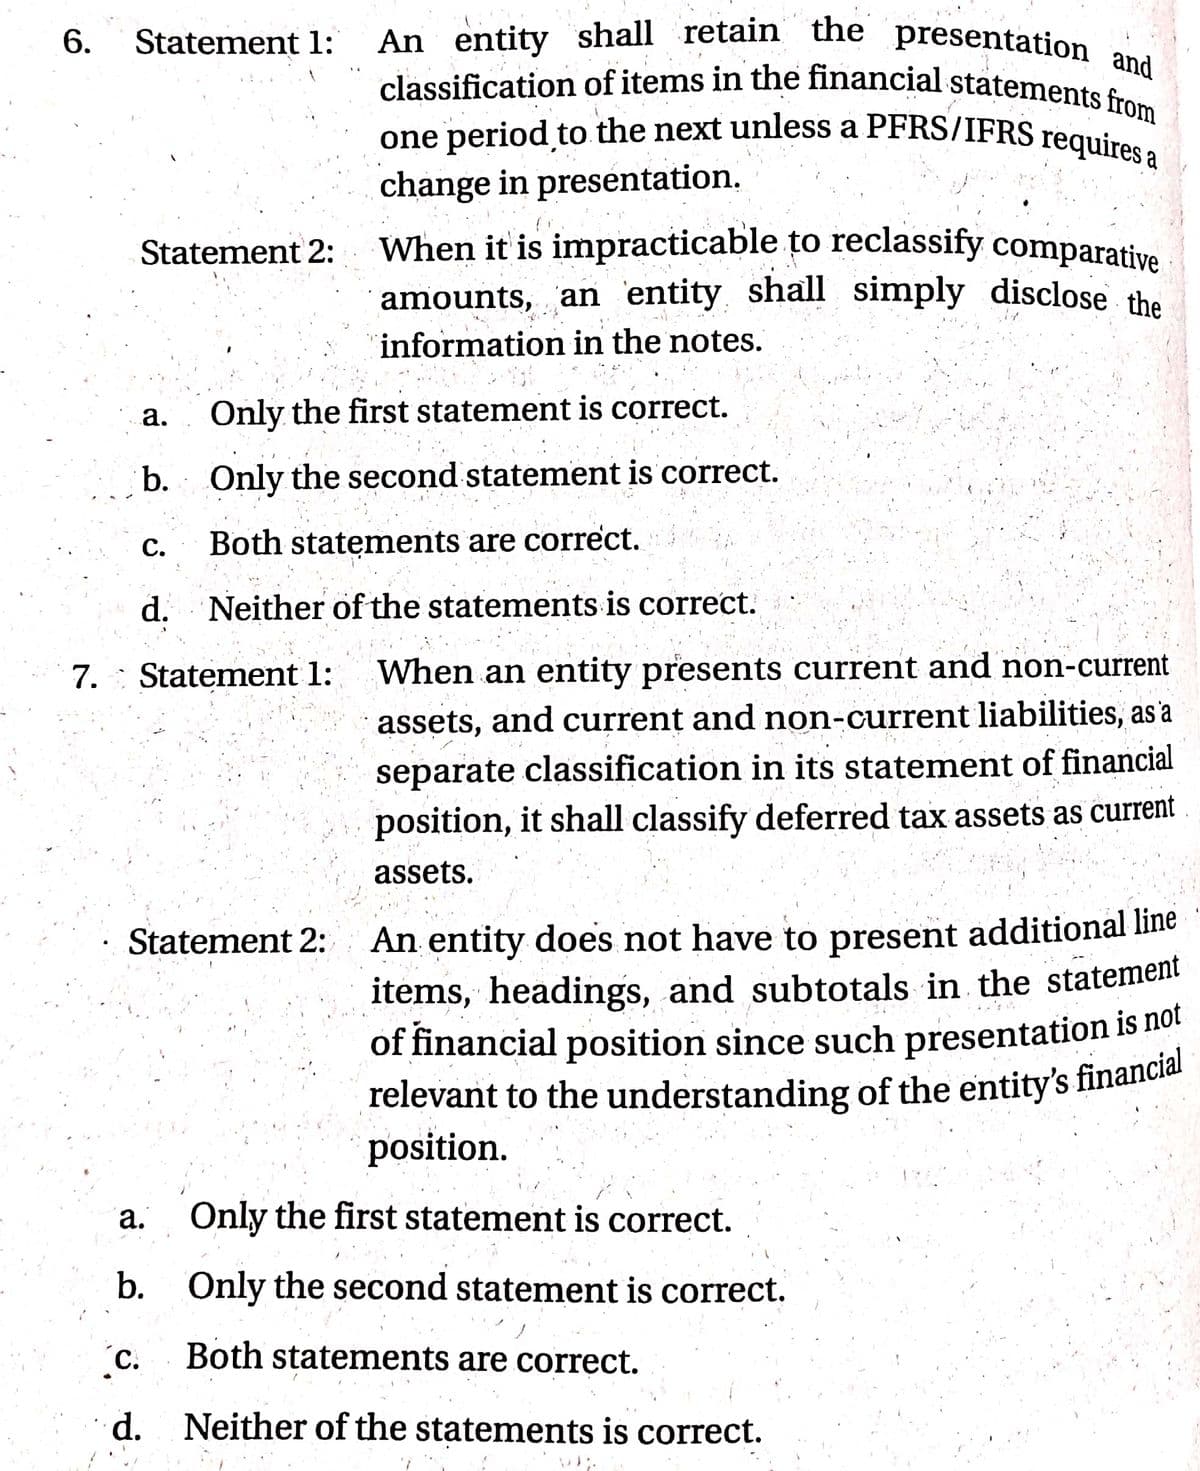 relevant to the understanding of the entity's financial
6.
classification of items in the financial statements from
An entity shall retain the presentation and
one period to the next unless a PFRS/IFRS requires a
When it is impracticable to reclassify comparative
Statement 1:
one period to the next unless a PFRS/IFRS requires
change in presentation.
Statement 2:
amounts, an entity shall simply disclose the
information in the notes.
а.
Only the first statement is correct.
b. Only the second statement is correct.
с.
Both statements are correct.
d. Neither of the statements is correct.
7. : Statement 1:
When an entity presents current and non-current
assets, and current and non-current liabilities, as'a
separate classification in its statement of financial
position, it shall classify deferred tax assets as current
assets.
An entity does not have to present additional line
items, headings, and subtotals in the statement
of financial position since such presentation is no!
Statement 2:
position.
а.
Only the first statement is correct.
b.
Only the second statement is correct.
(C.
Both statenments are correct.
d.
Neither of the statements is correct.
